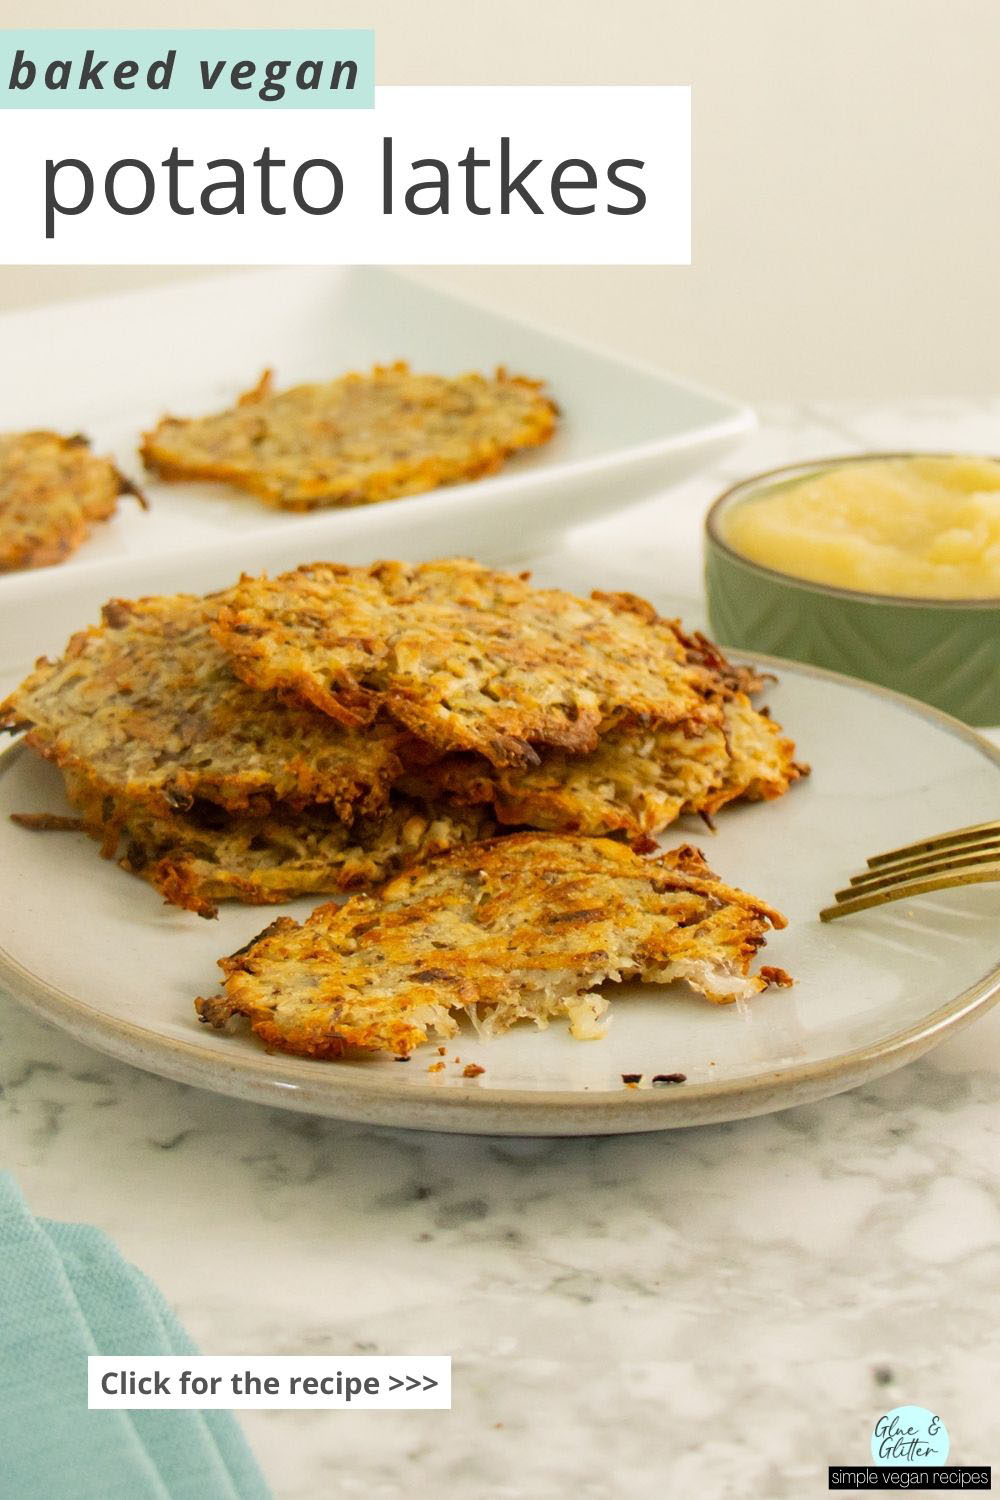 stack of vegan latkes on a plate with a bite taken out of one, so you can see inside, text overlay